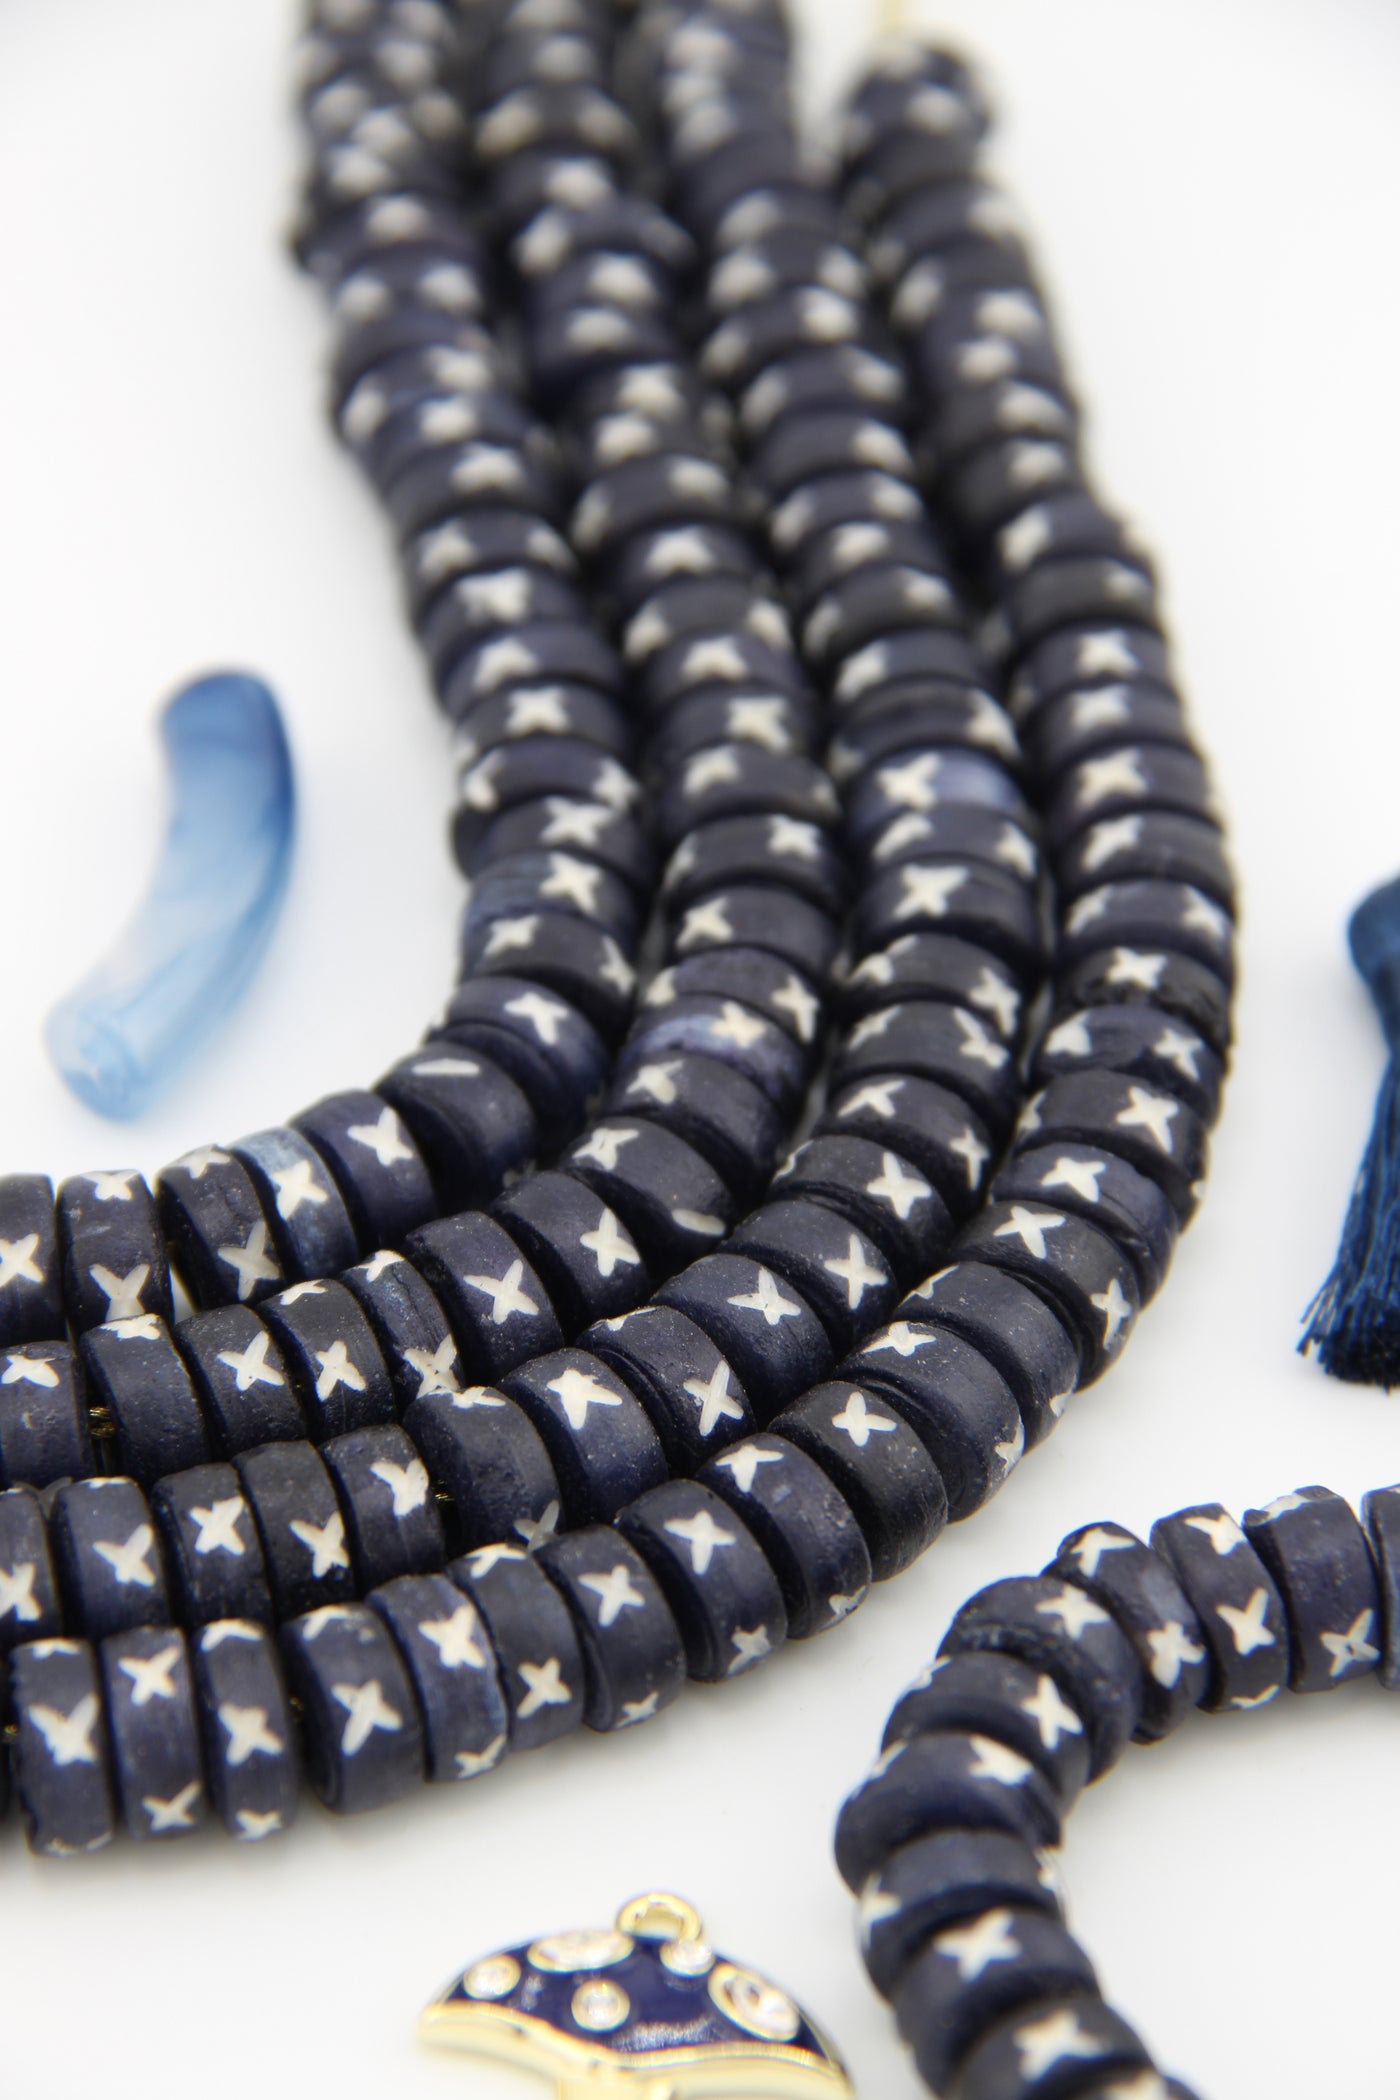 Indigo Blue & White Carved Tribal Disc Bone Beads: 10x5mm, 45 pieces Made in India, from buffalo bone (cruelty-free) that has been carved with a tribal "X"